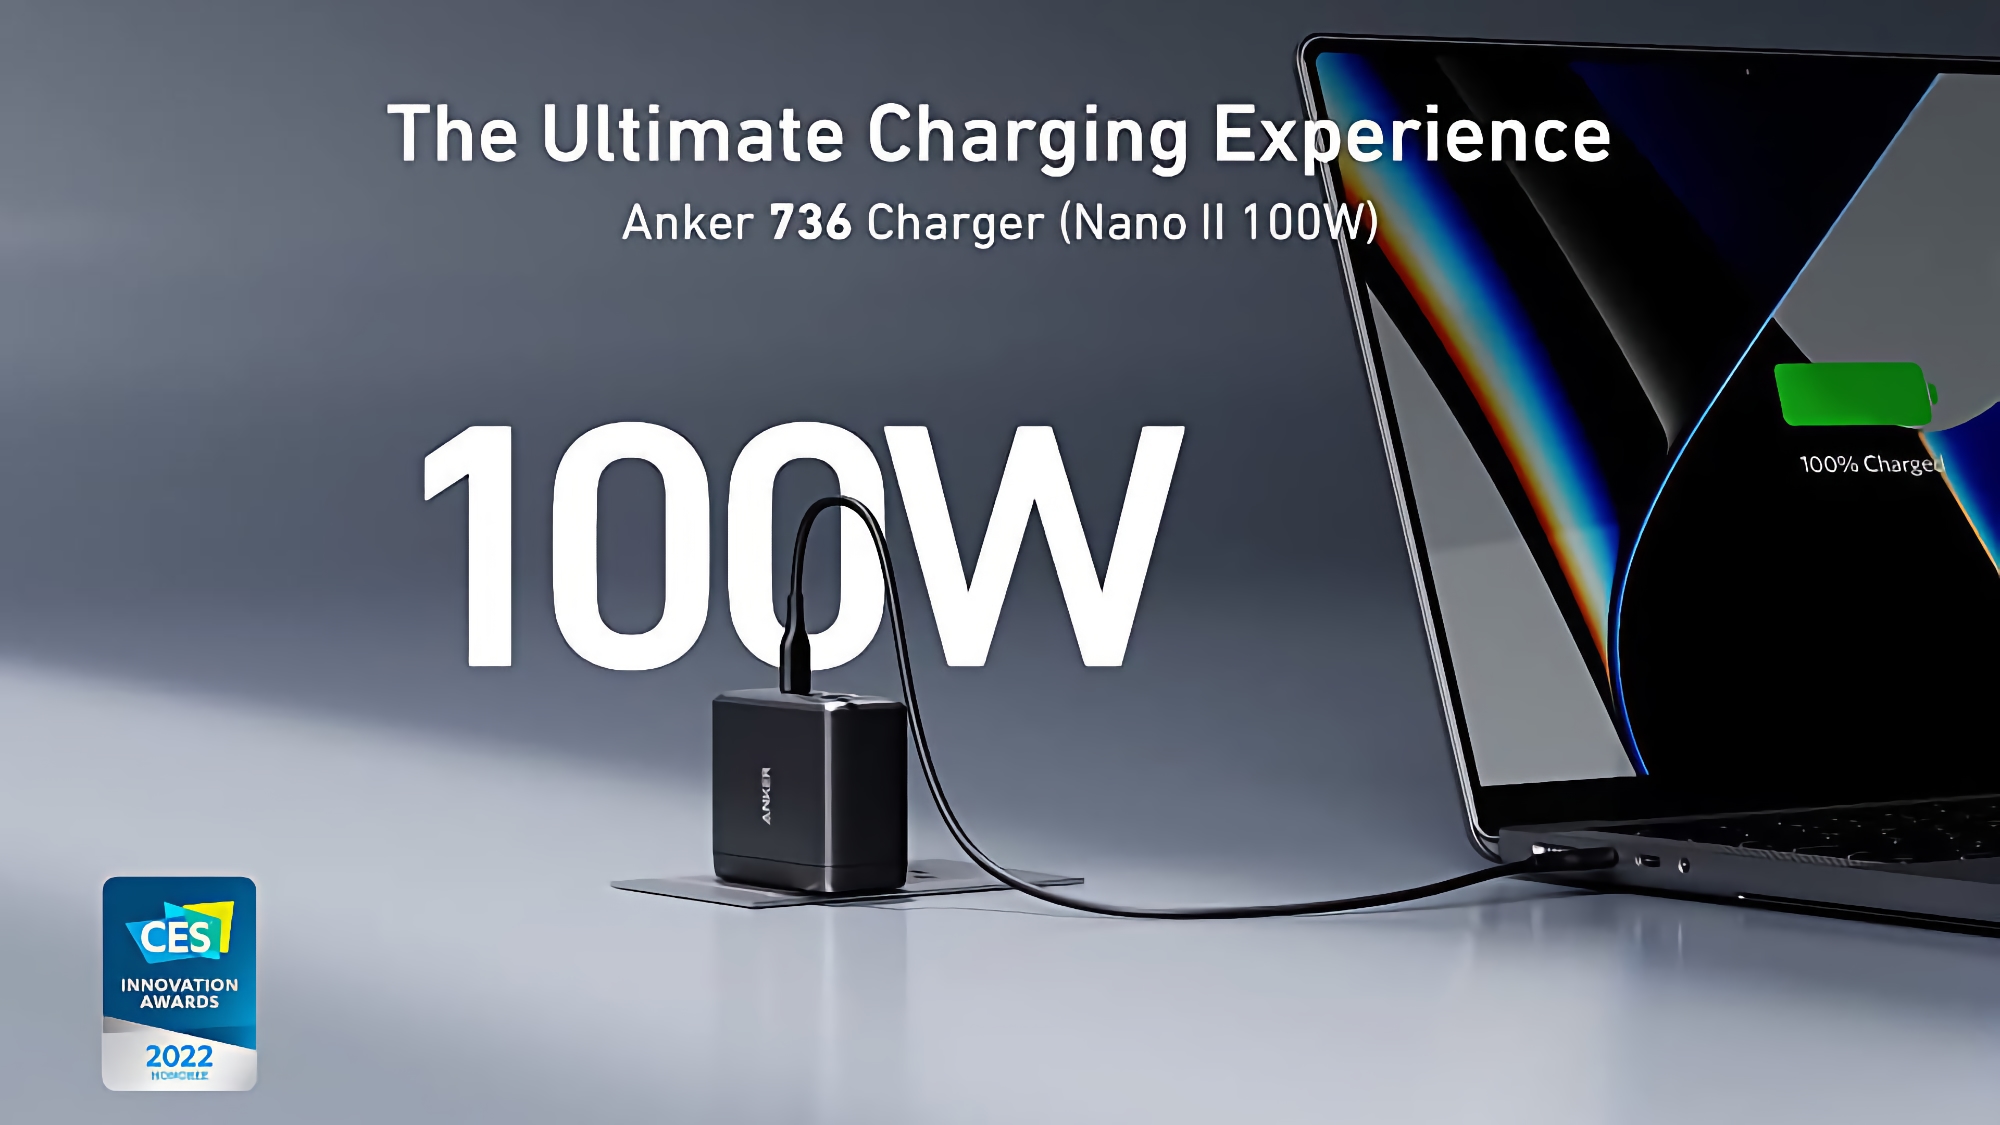 Anker launches 100-watt GaN charger with three USB ports for $76